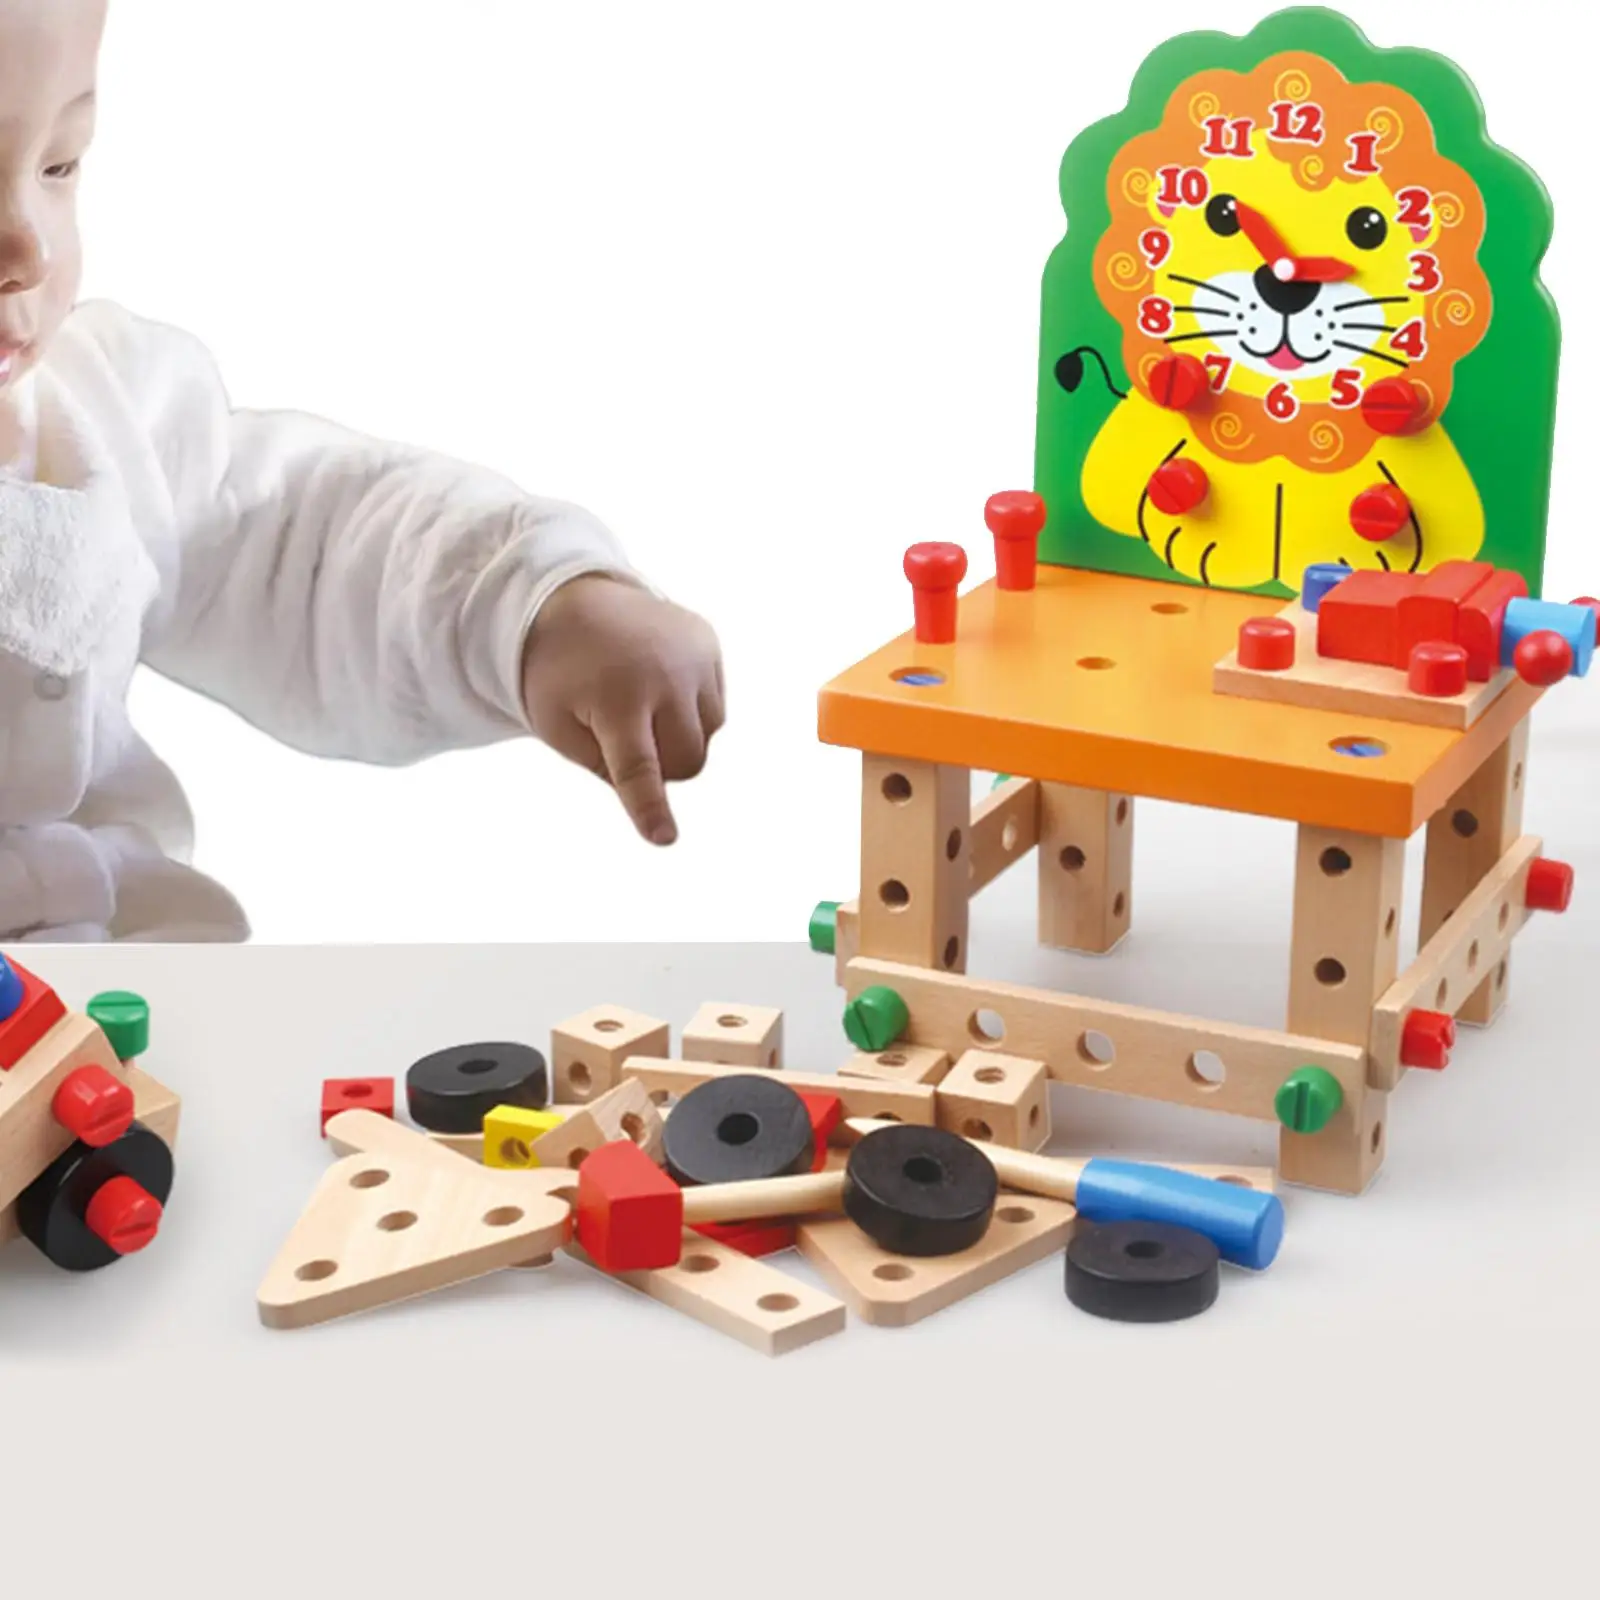 Wooden Assembling Chair Montessori Toys Educational Building Wooden Project Woodworking Kit for Girls Boys Children